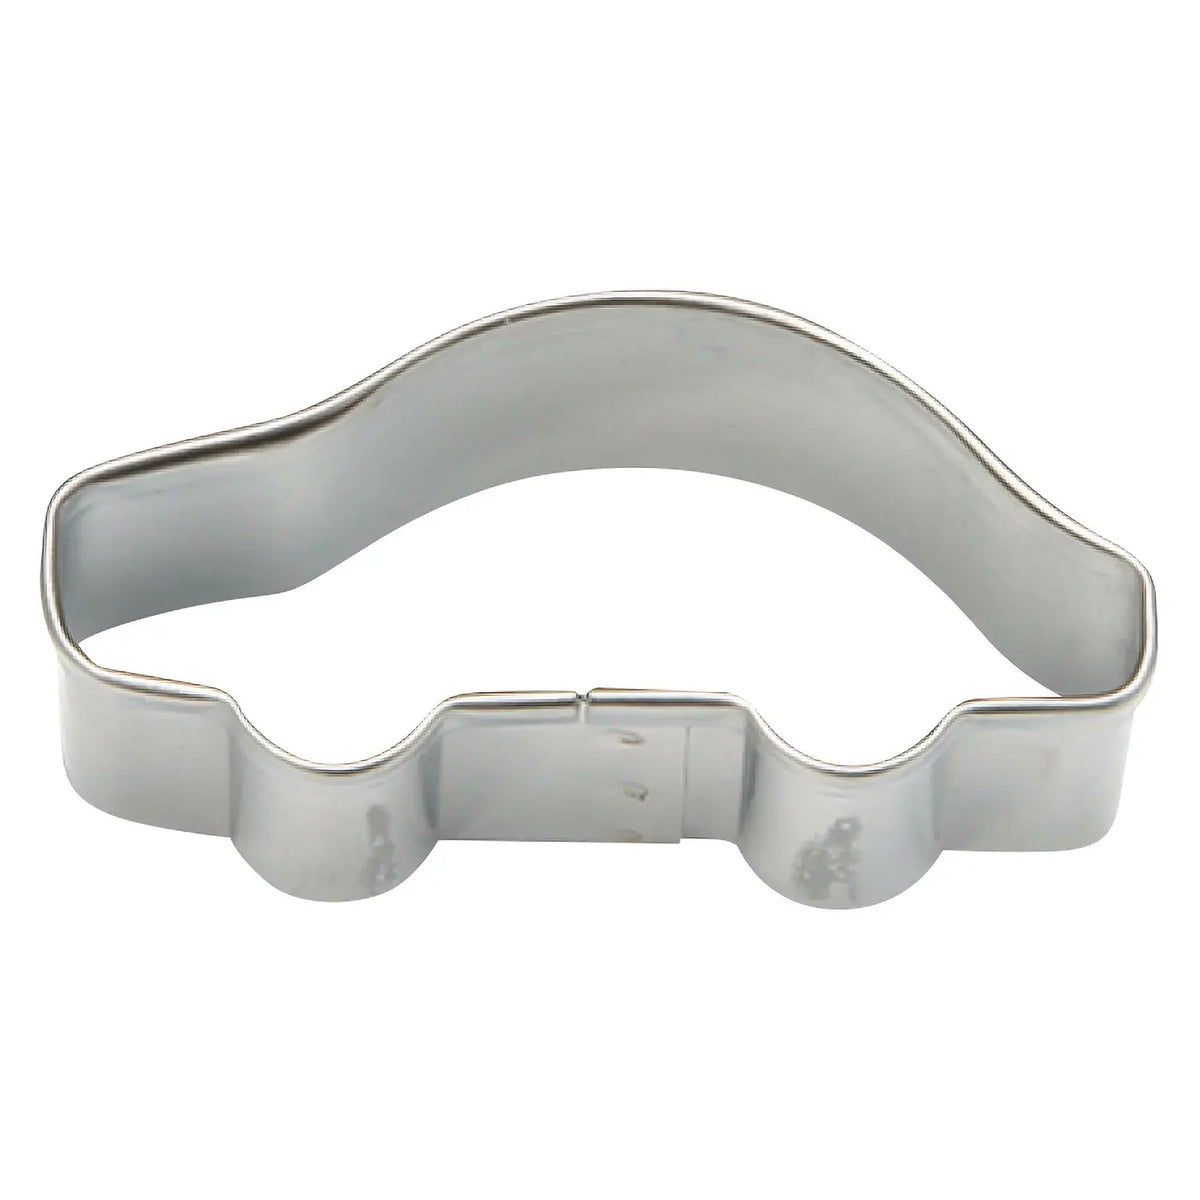 TIGERCROWN Cake Land Stainless Steel Cookie Cutter Car